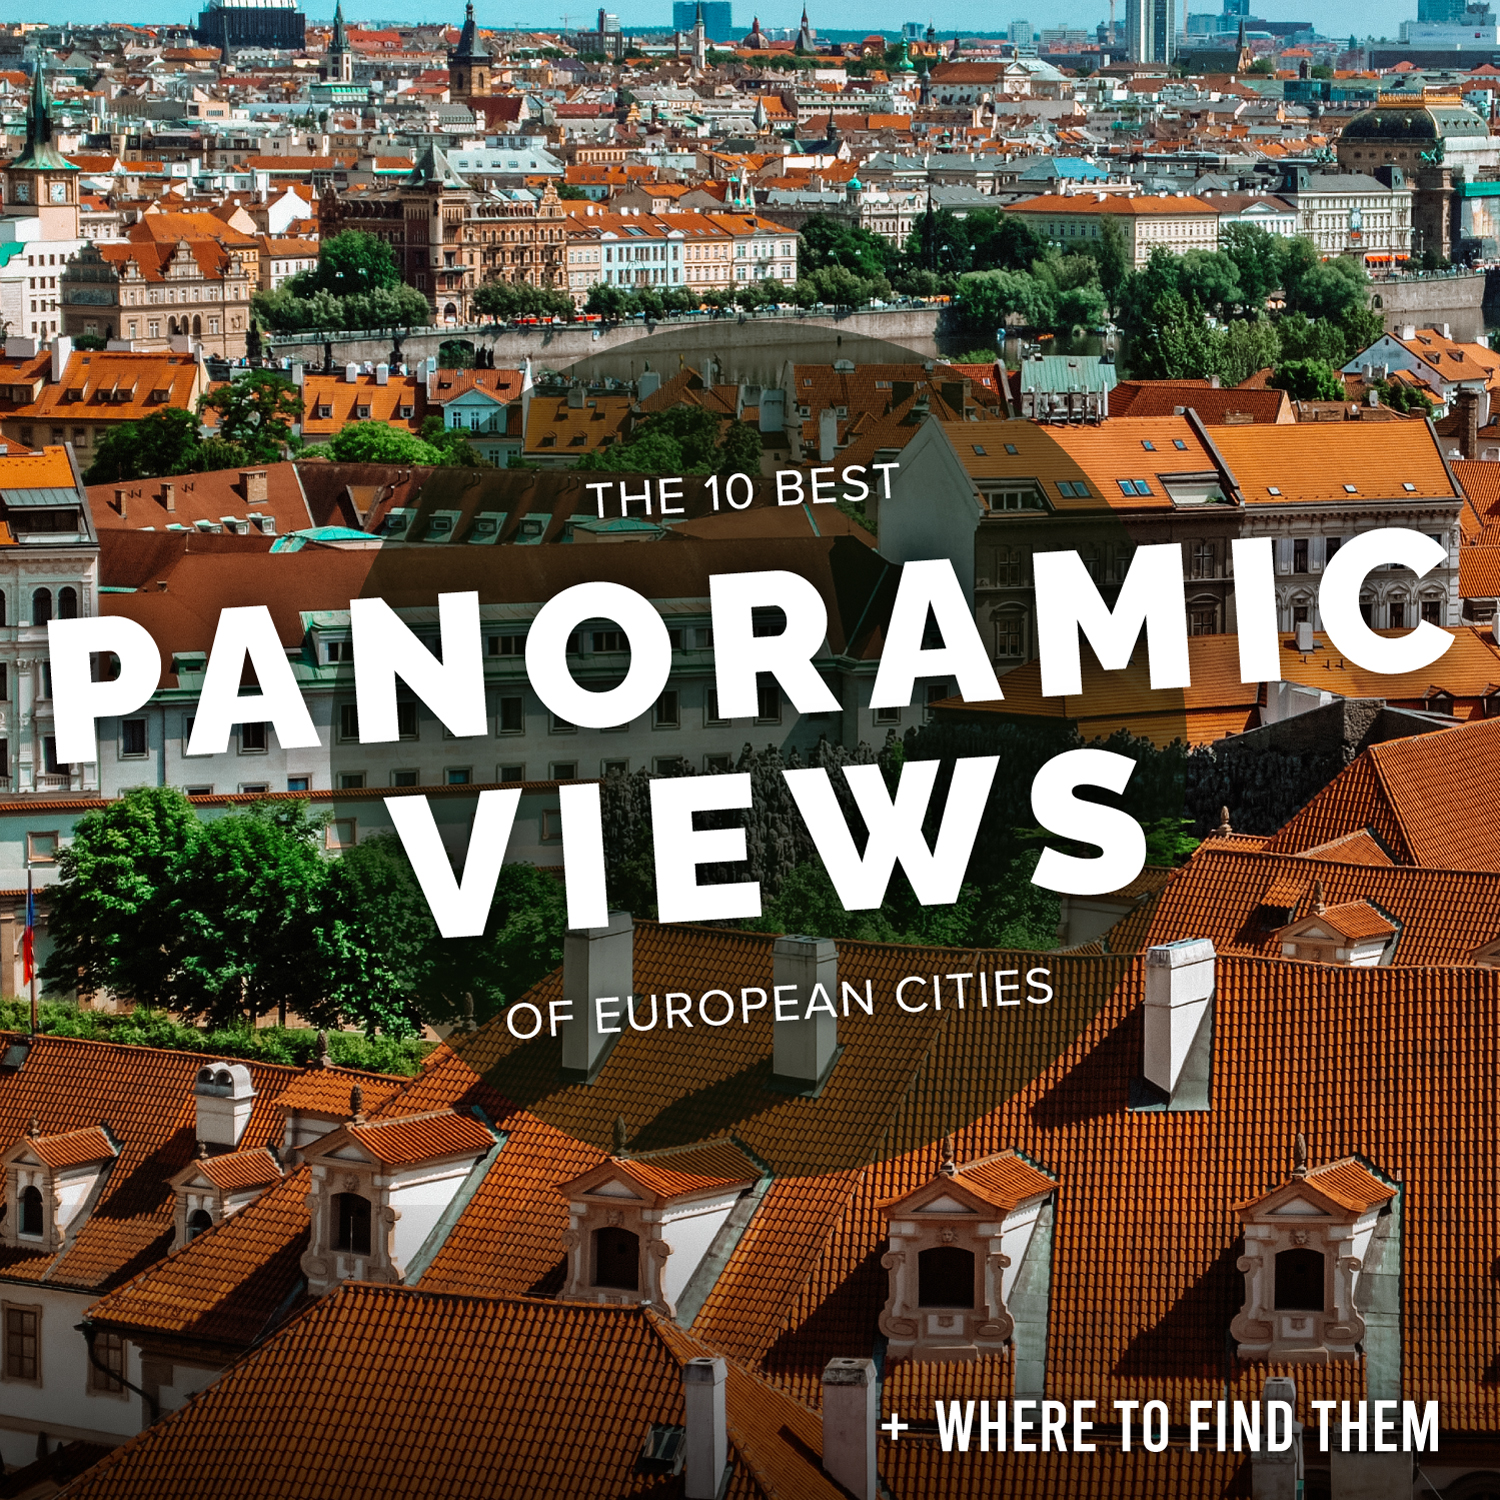 The 10 Best Panoramic Views of European Ciities + Where to Find Them